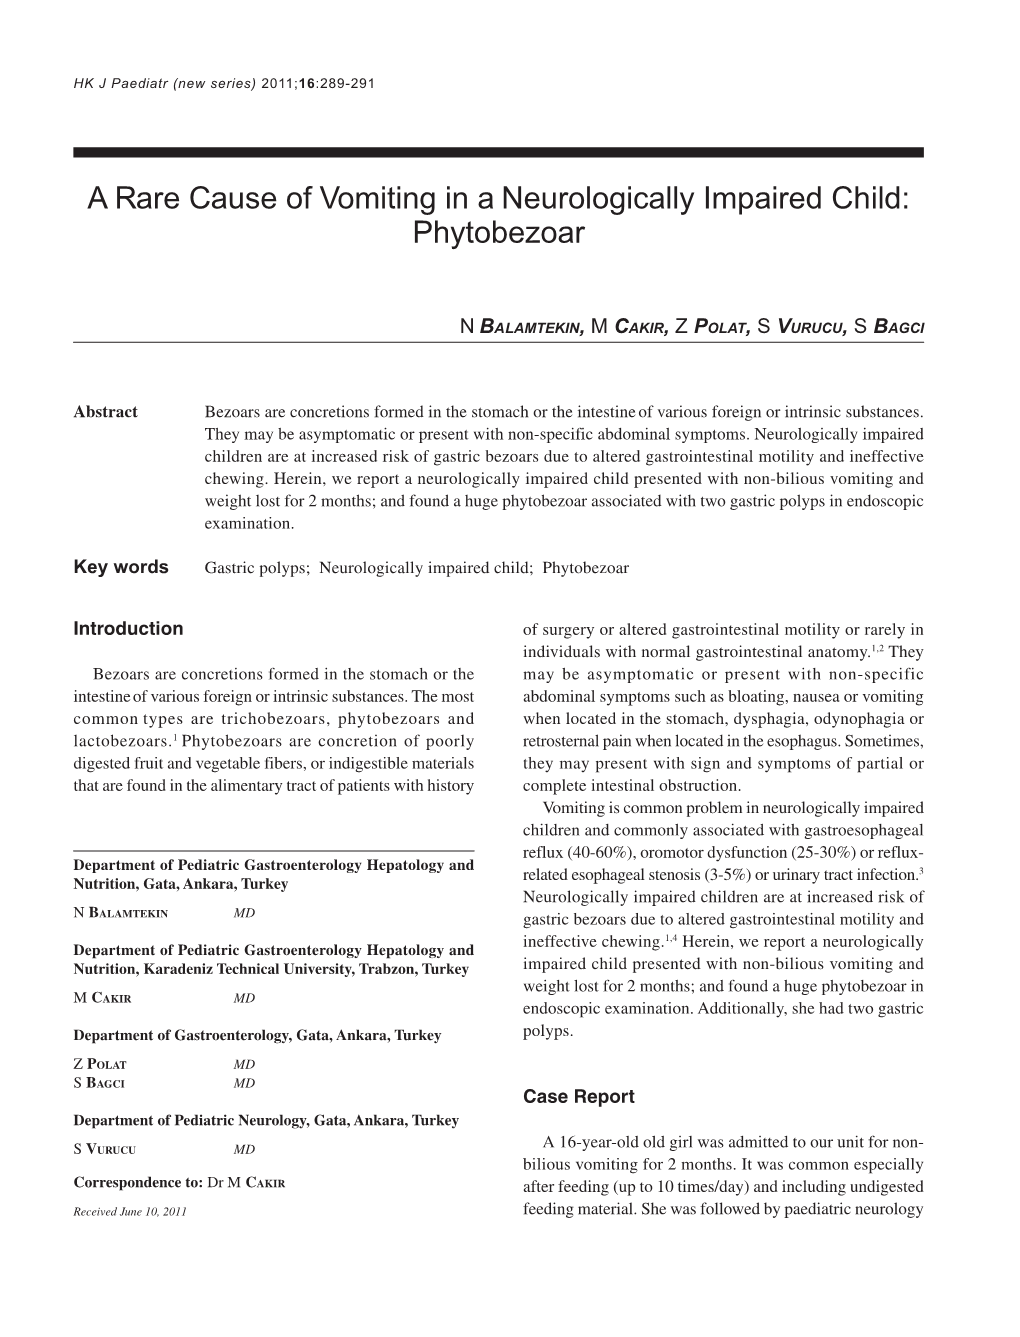 A Rare Cause of Vomiting in a Neurologically Impaired Child: Phytobezoar